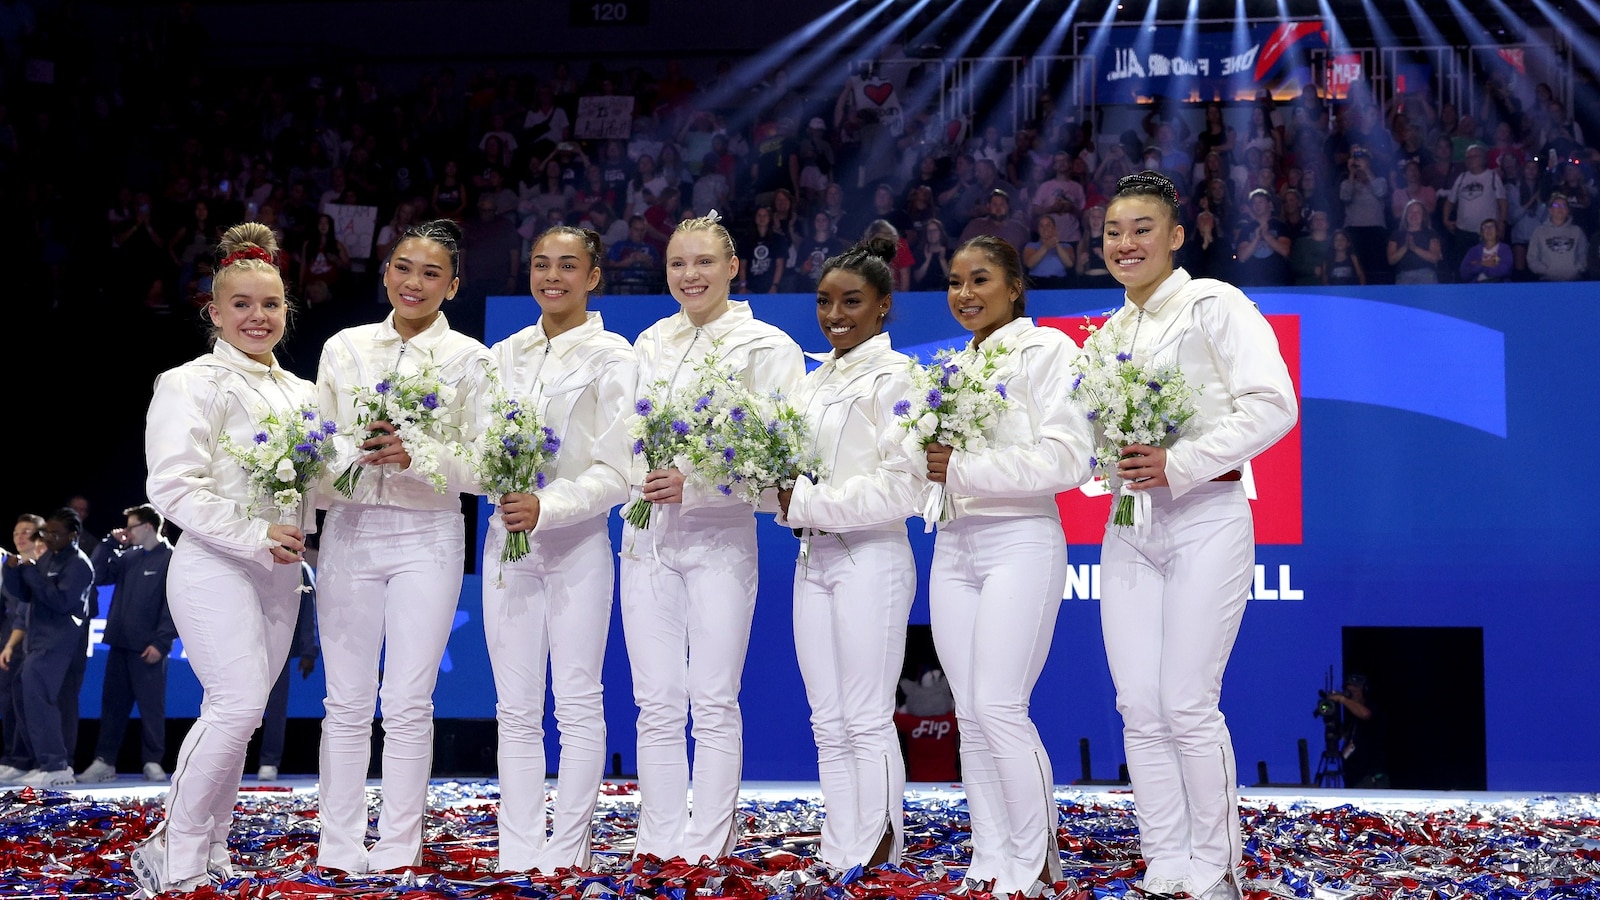 Full Roster Revealed: Simone Biles to Compete for Team USA at 2024 Paris Olympic Games